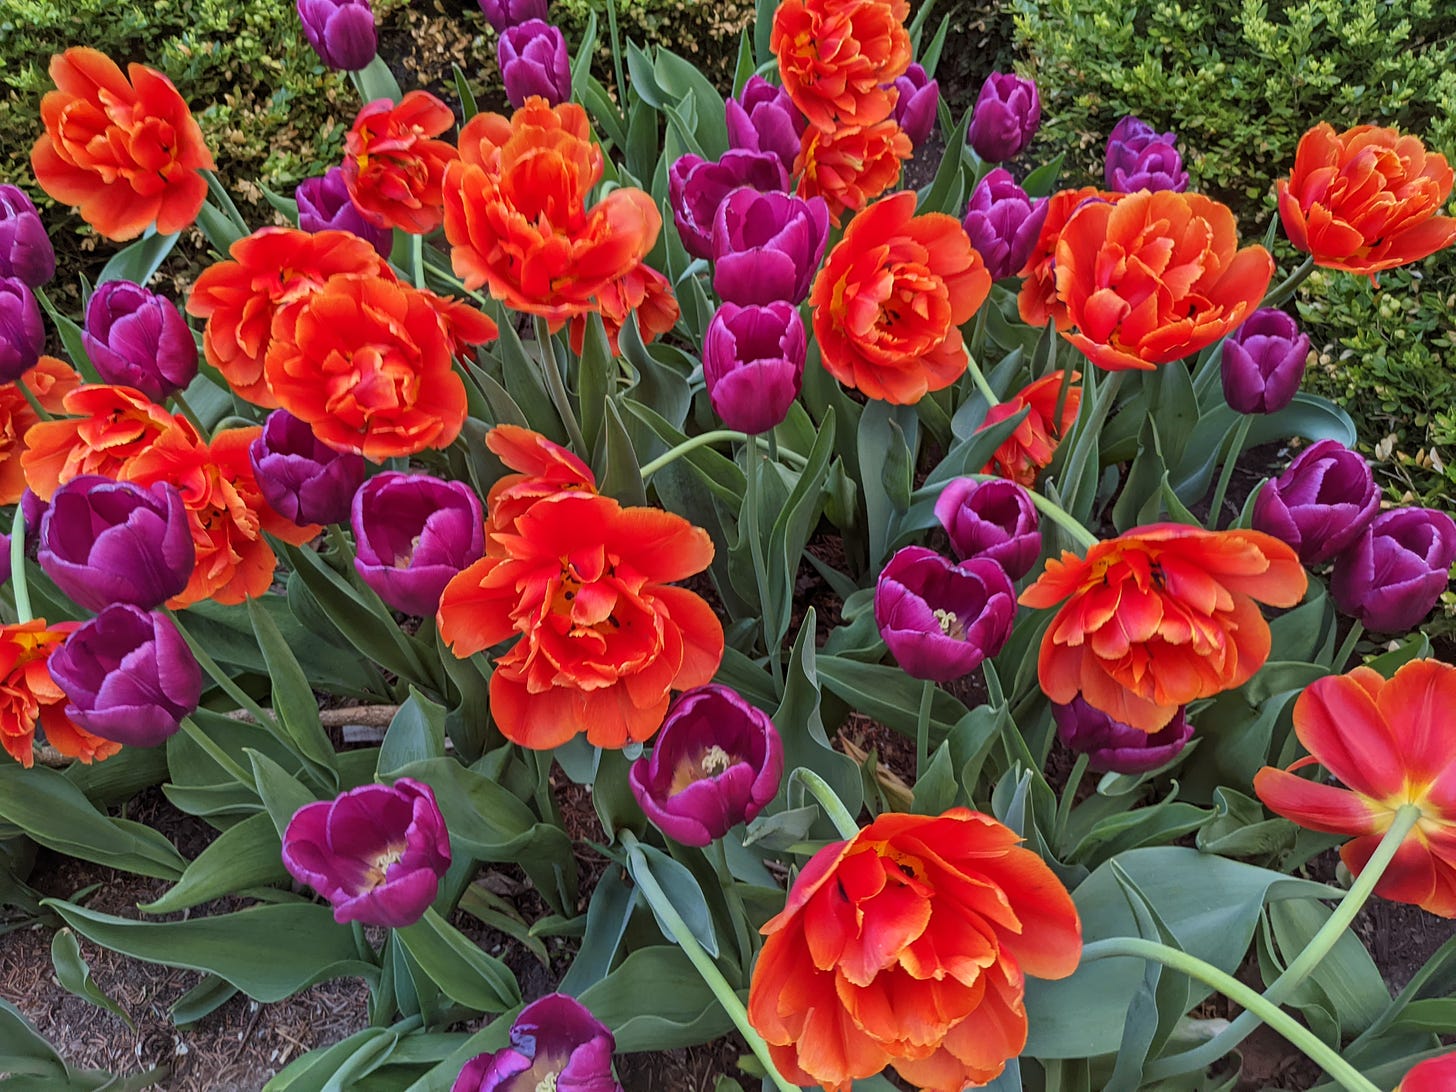 Photograph of bright red and purple tulips clustered together in a flower bed.